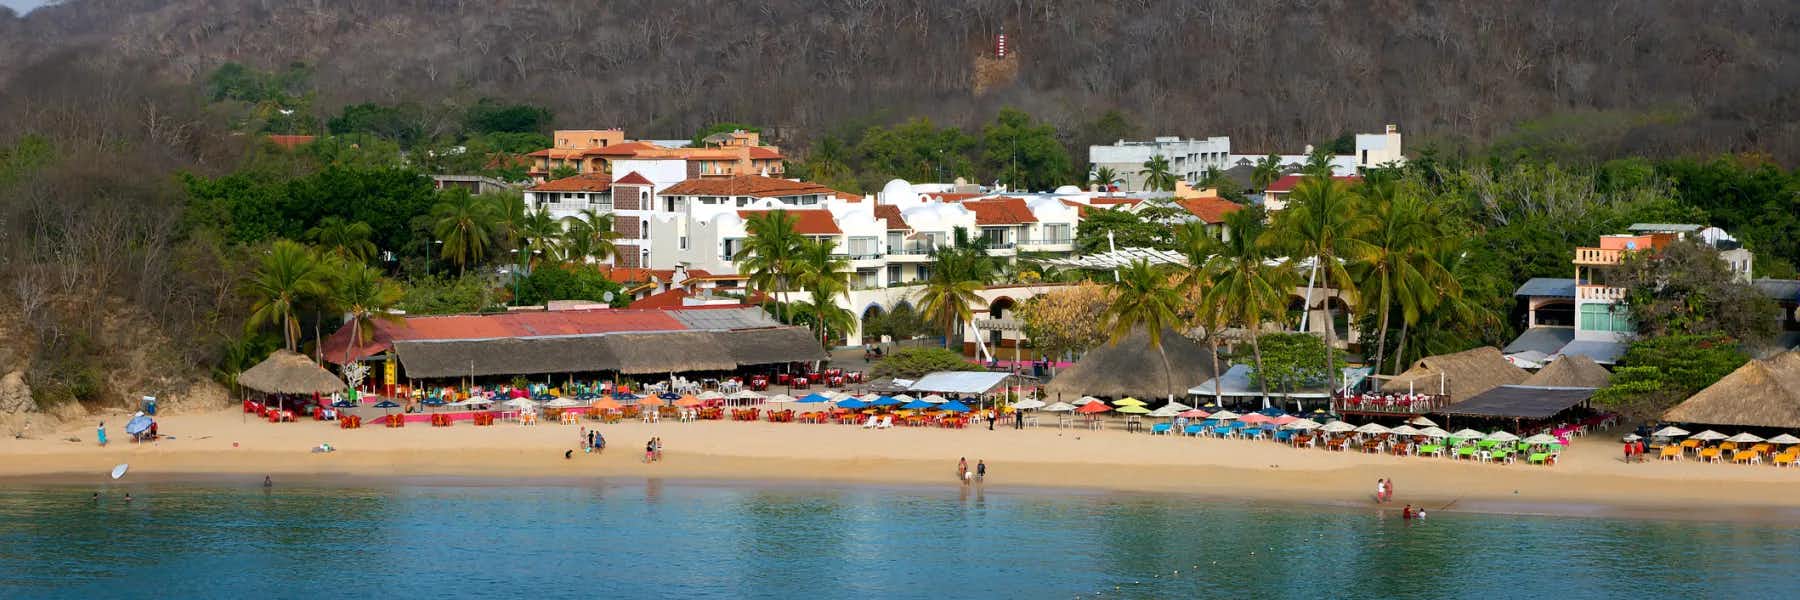 Why This Low-Key Mexican Resort Town is the Ideal Snowbird Escape